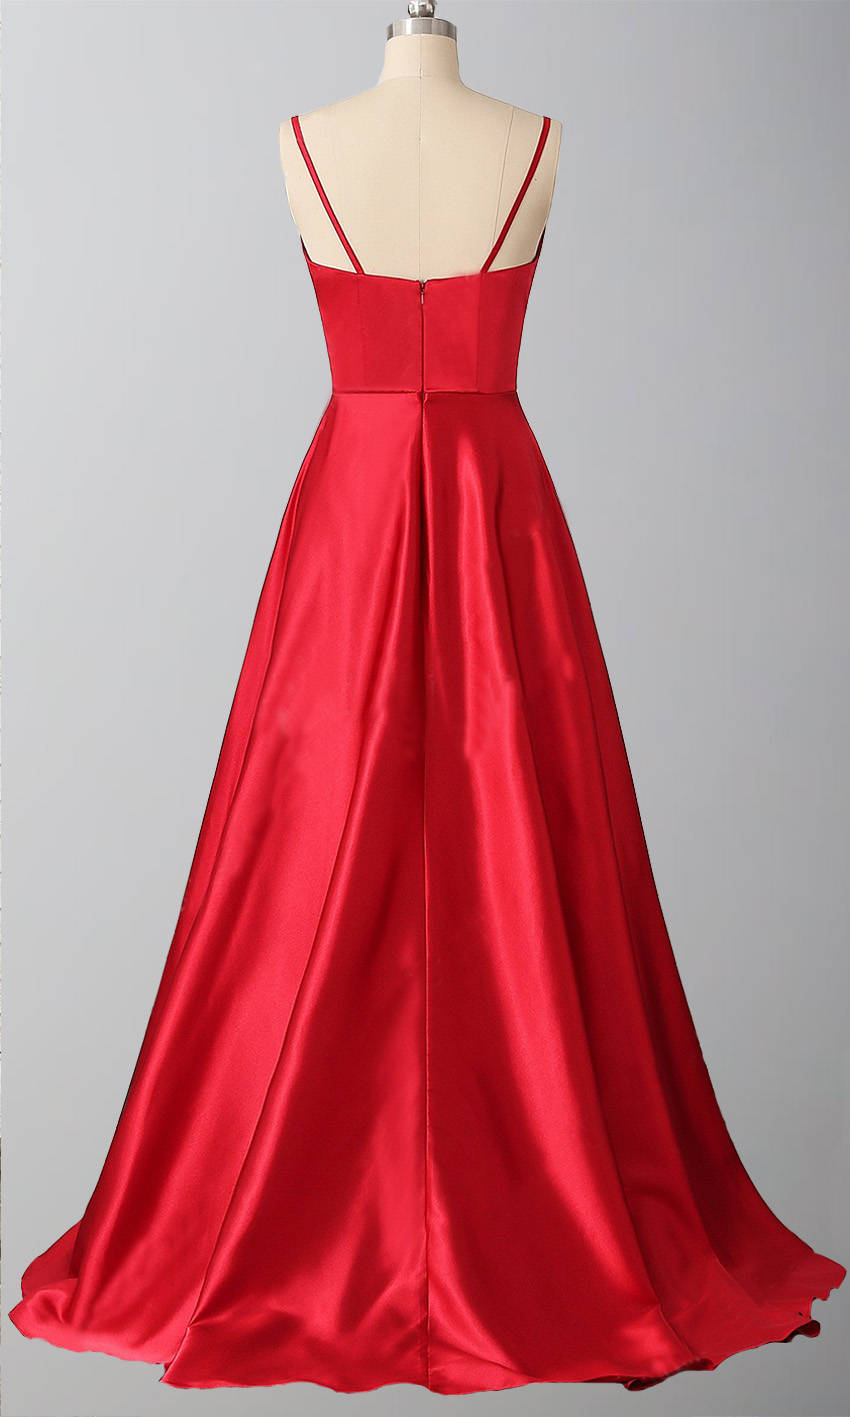 Red Prom Dress 2020, Prom Dresses, Pageant Dress, Evening Dress, Ball Dance Dresses, Graduation School Party Gown